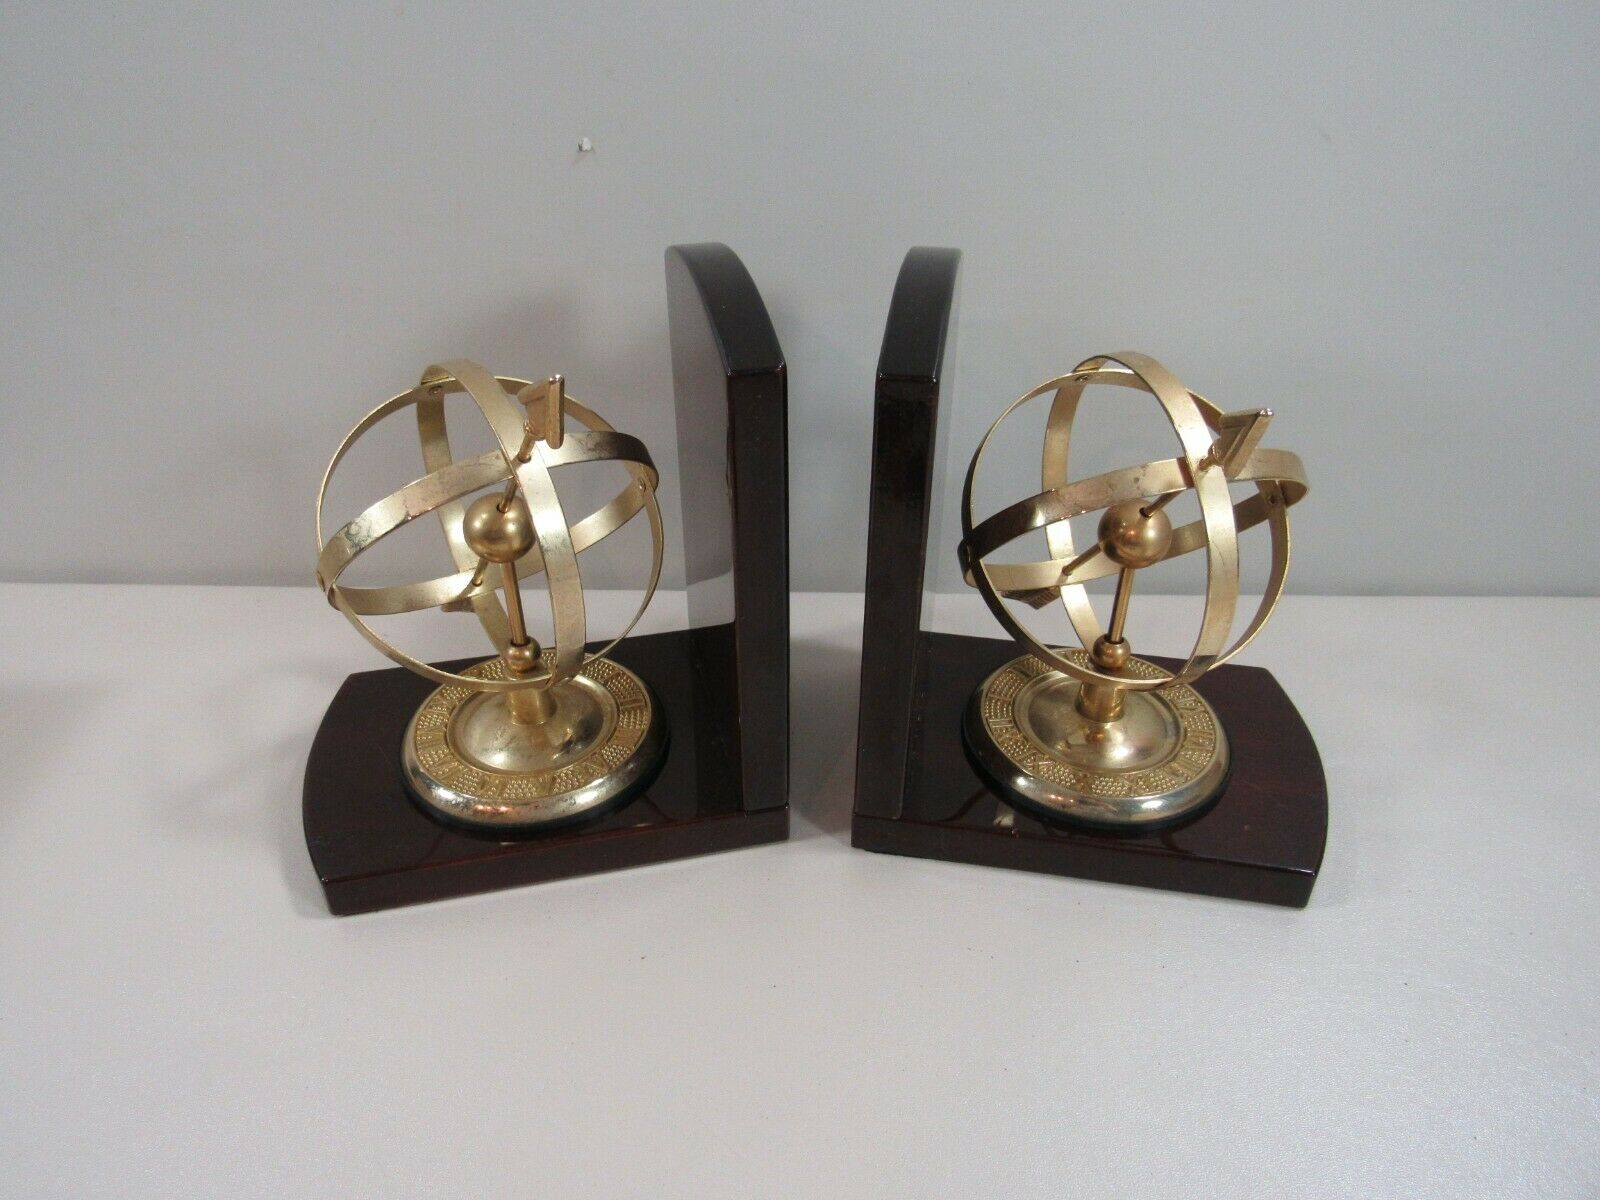 Vintage Pair Of Brass Sphere Sundial On Mahogany~cherry Wood Bookends